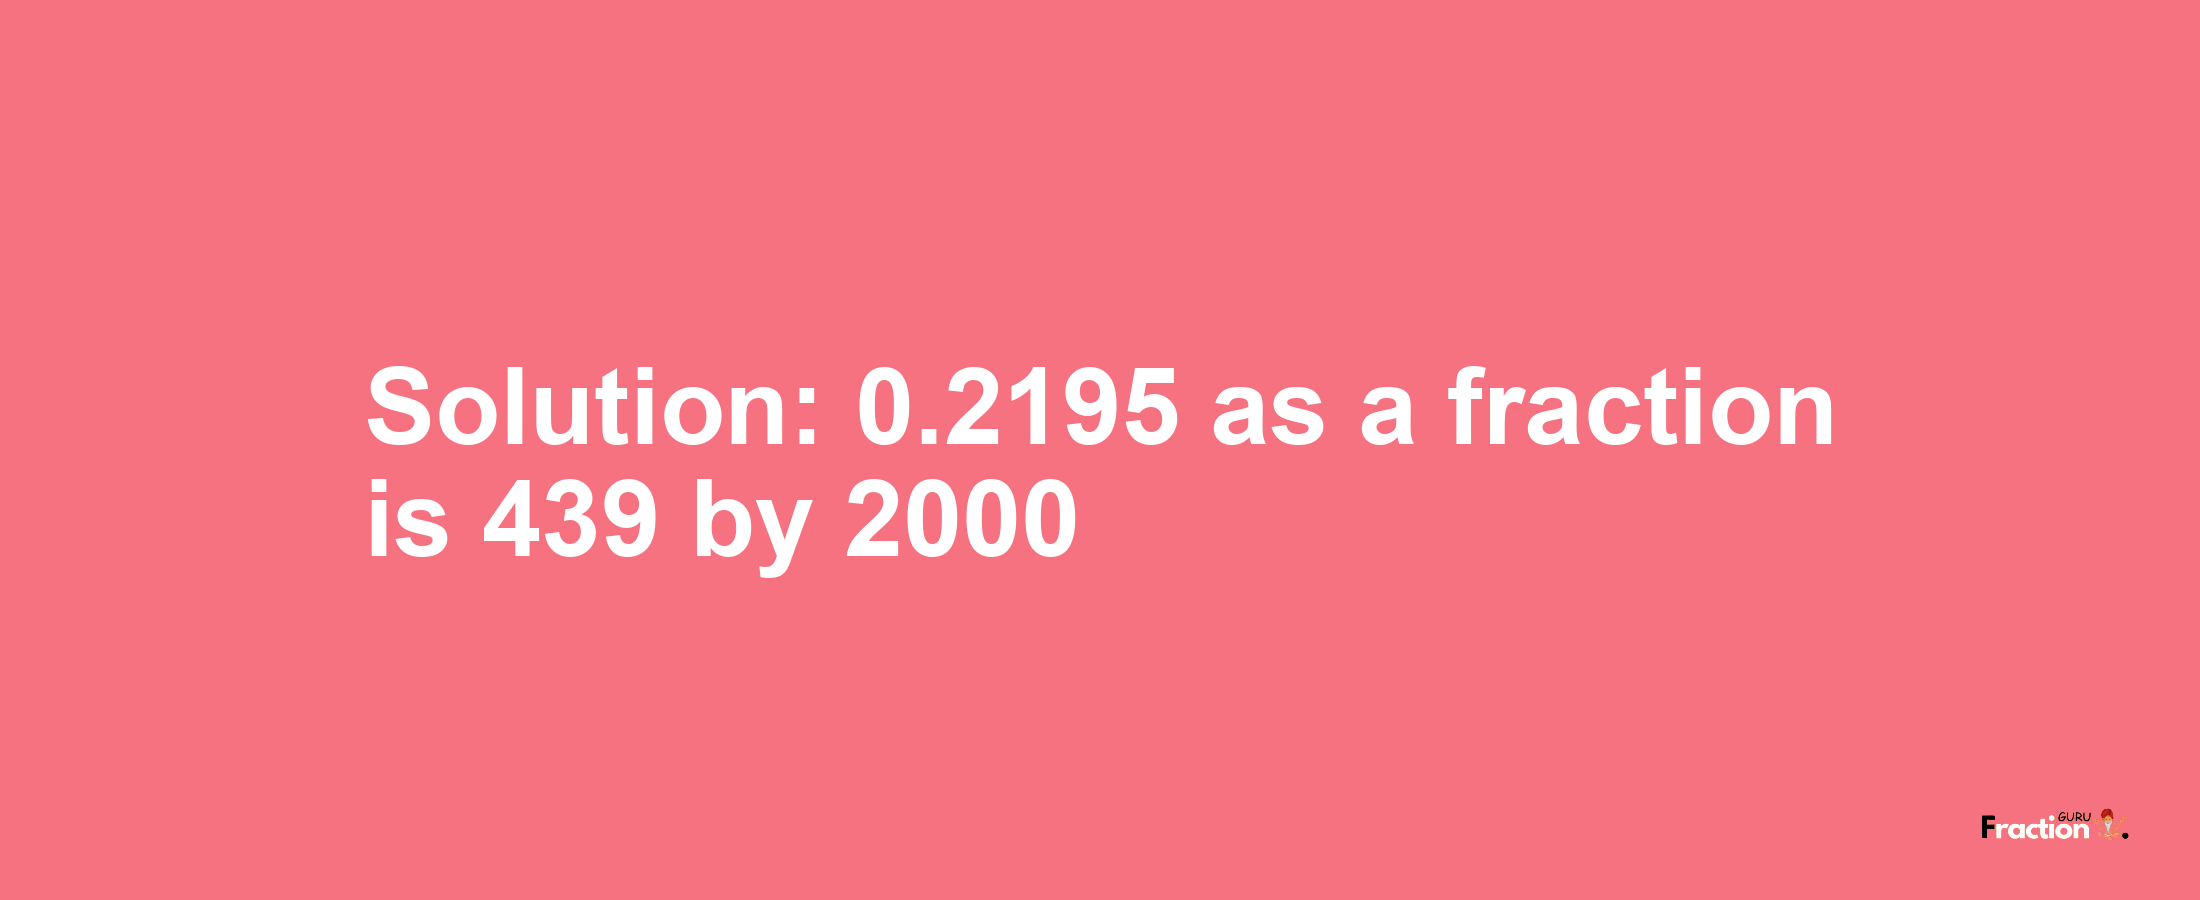 Solution:0.2195 as a fraction is 439/2000